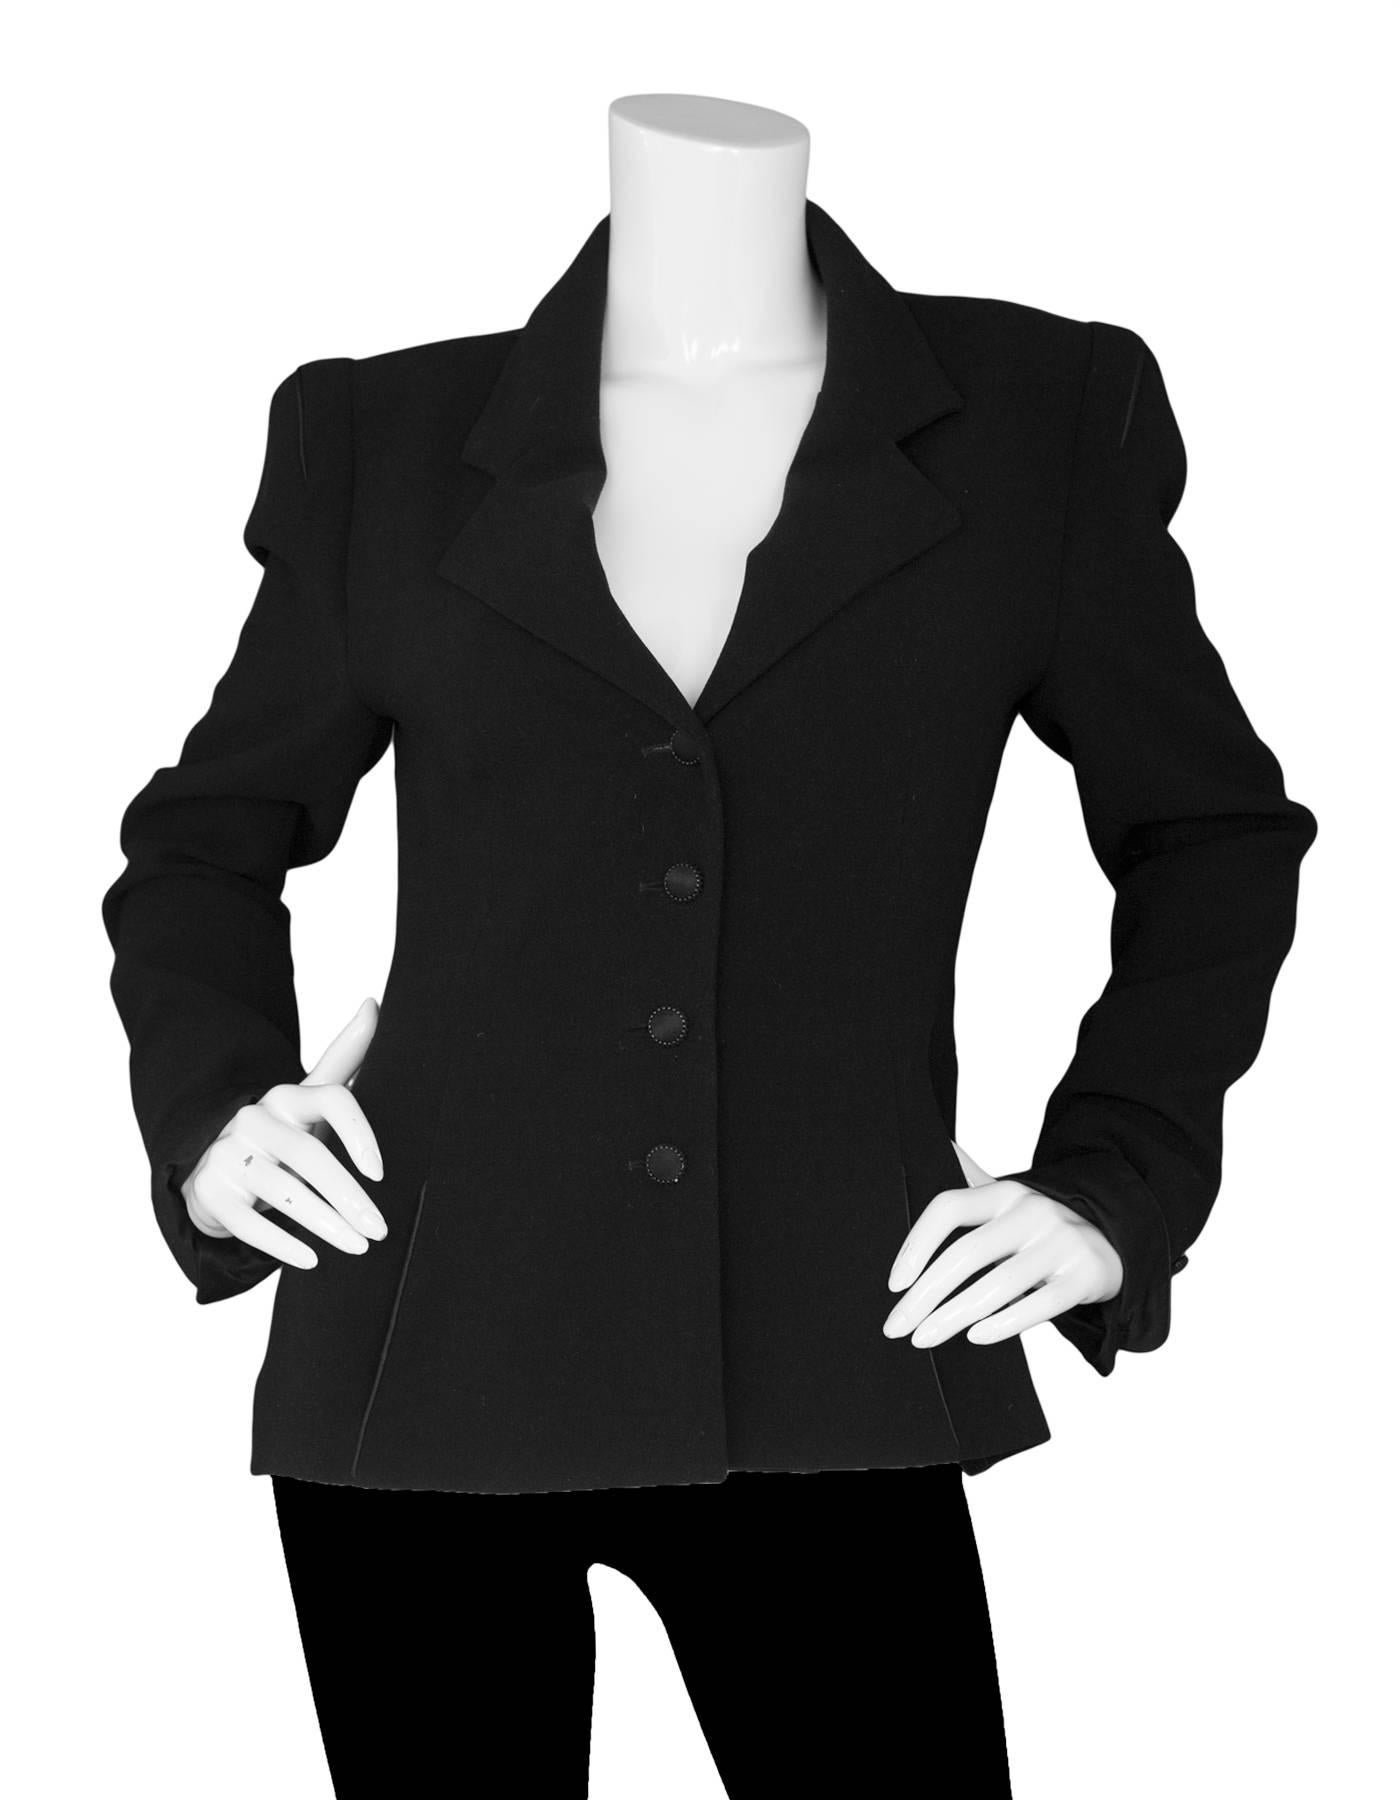 Karl Lagerfeld Black Jacket

Features satin buttons and trim with tie detail at back

Made In: France
Color: Black
Composition: Not listed, feels like wool blend
Lining: Black textile
Closure/Opening: Front button closure
Exterior Pockets: Side